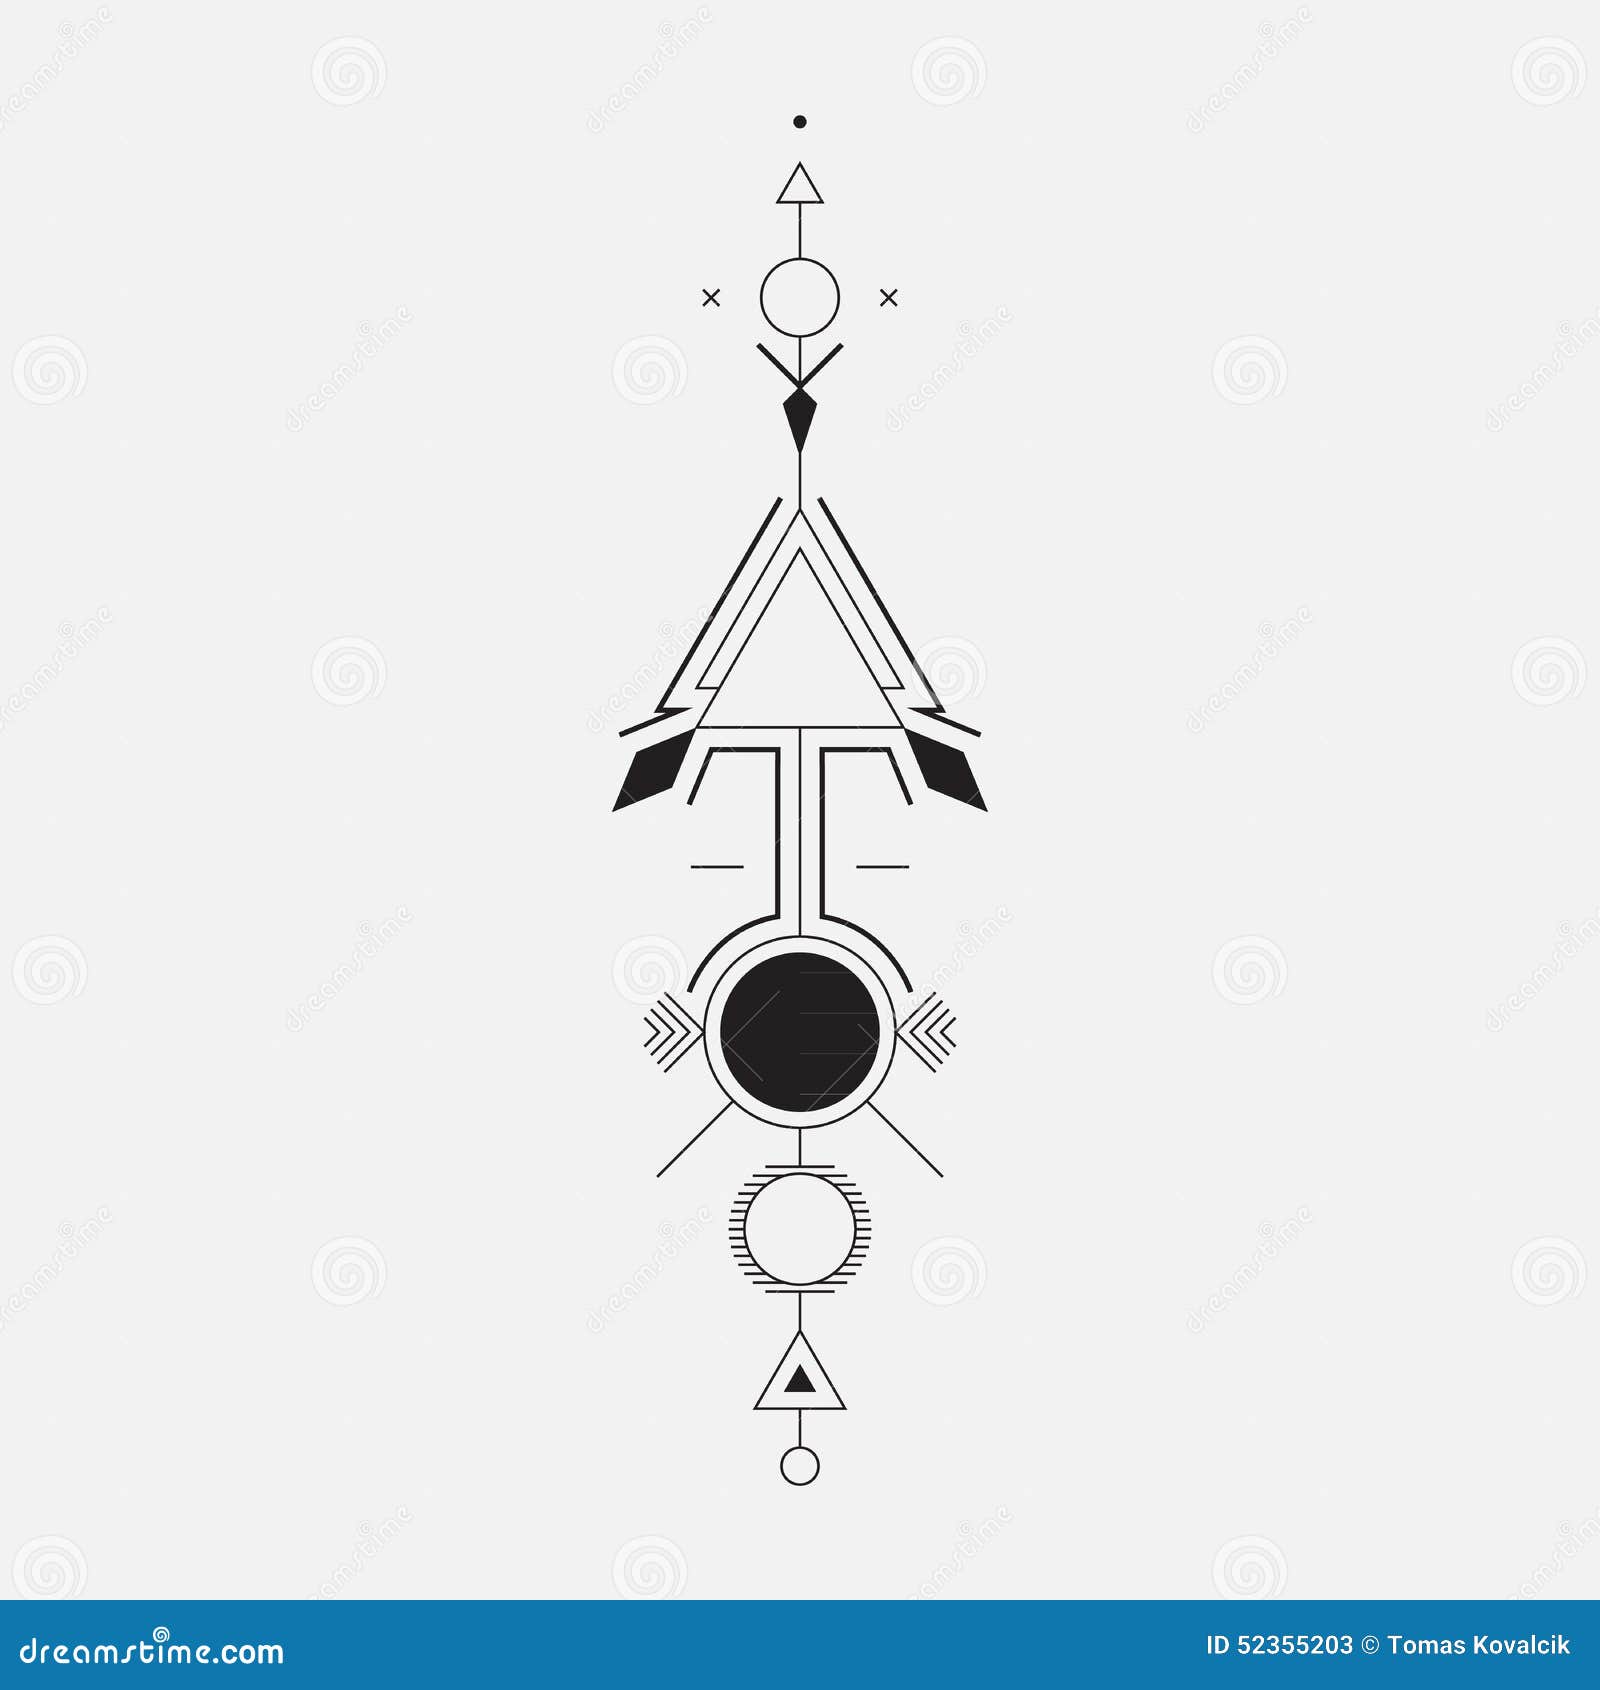 meaning 4 tattoo lines Image: Geometric Arrow Vector Stock 52355203